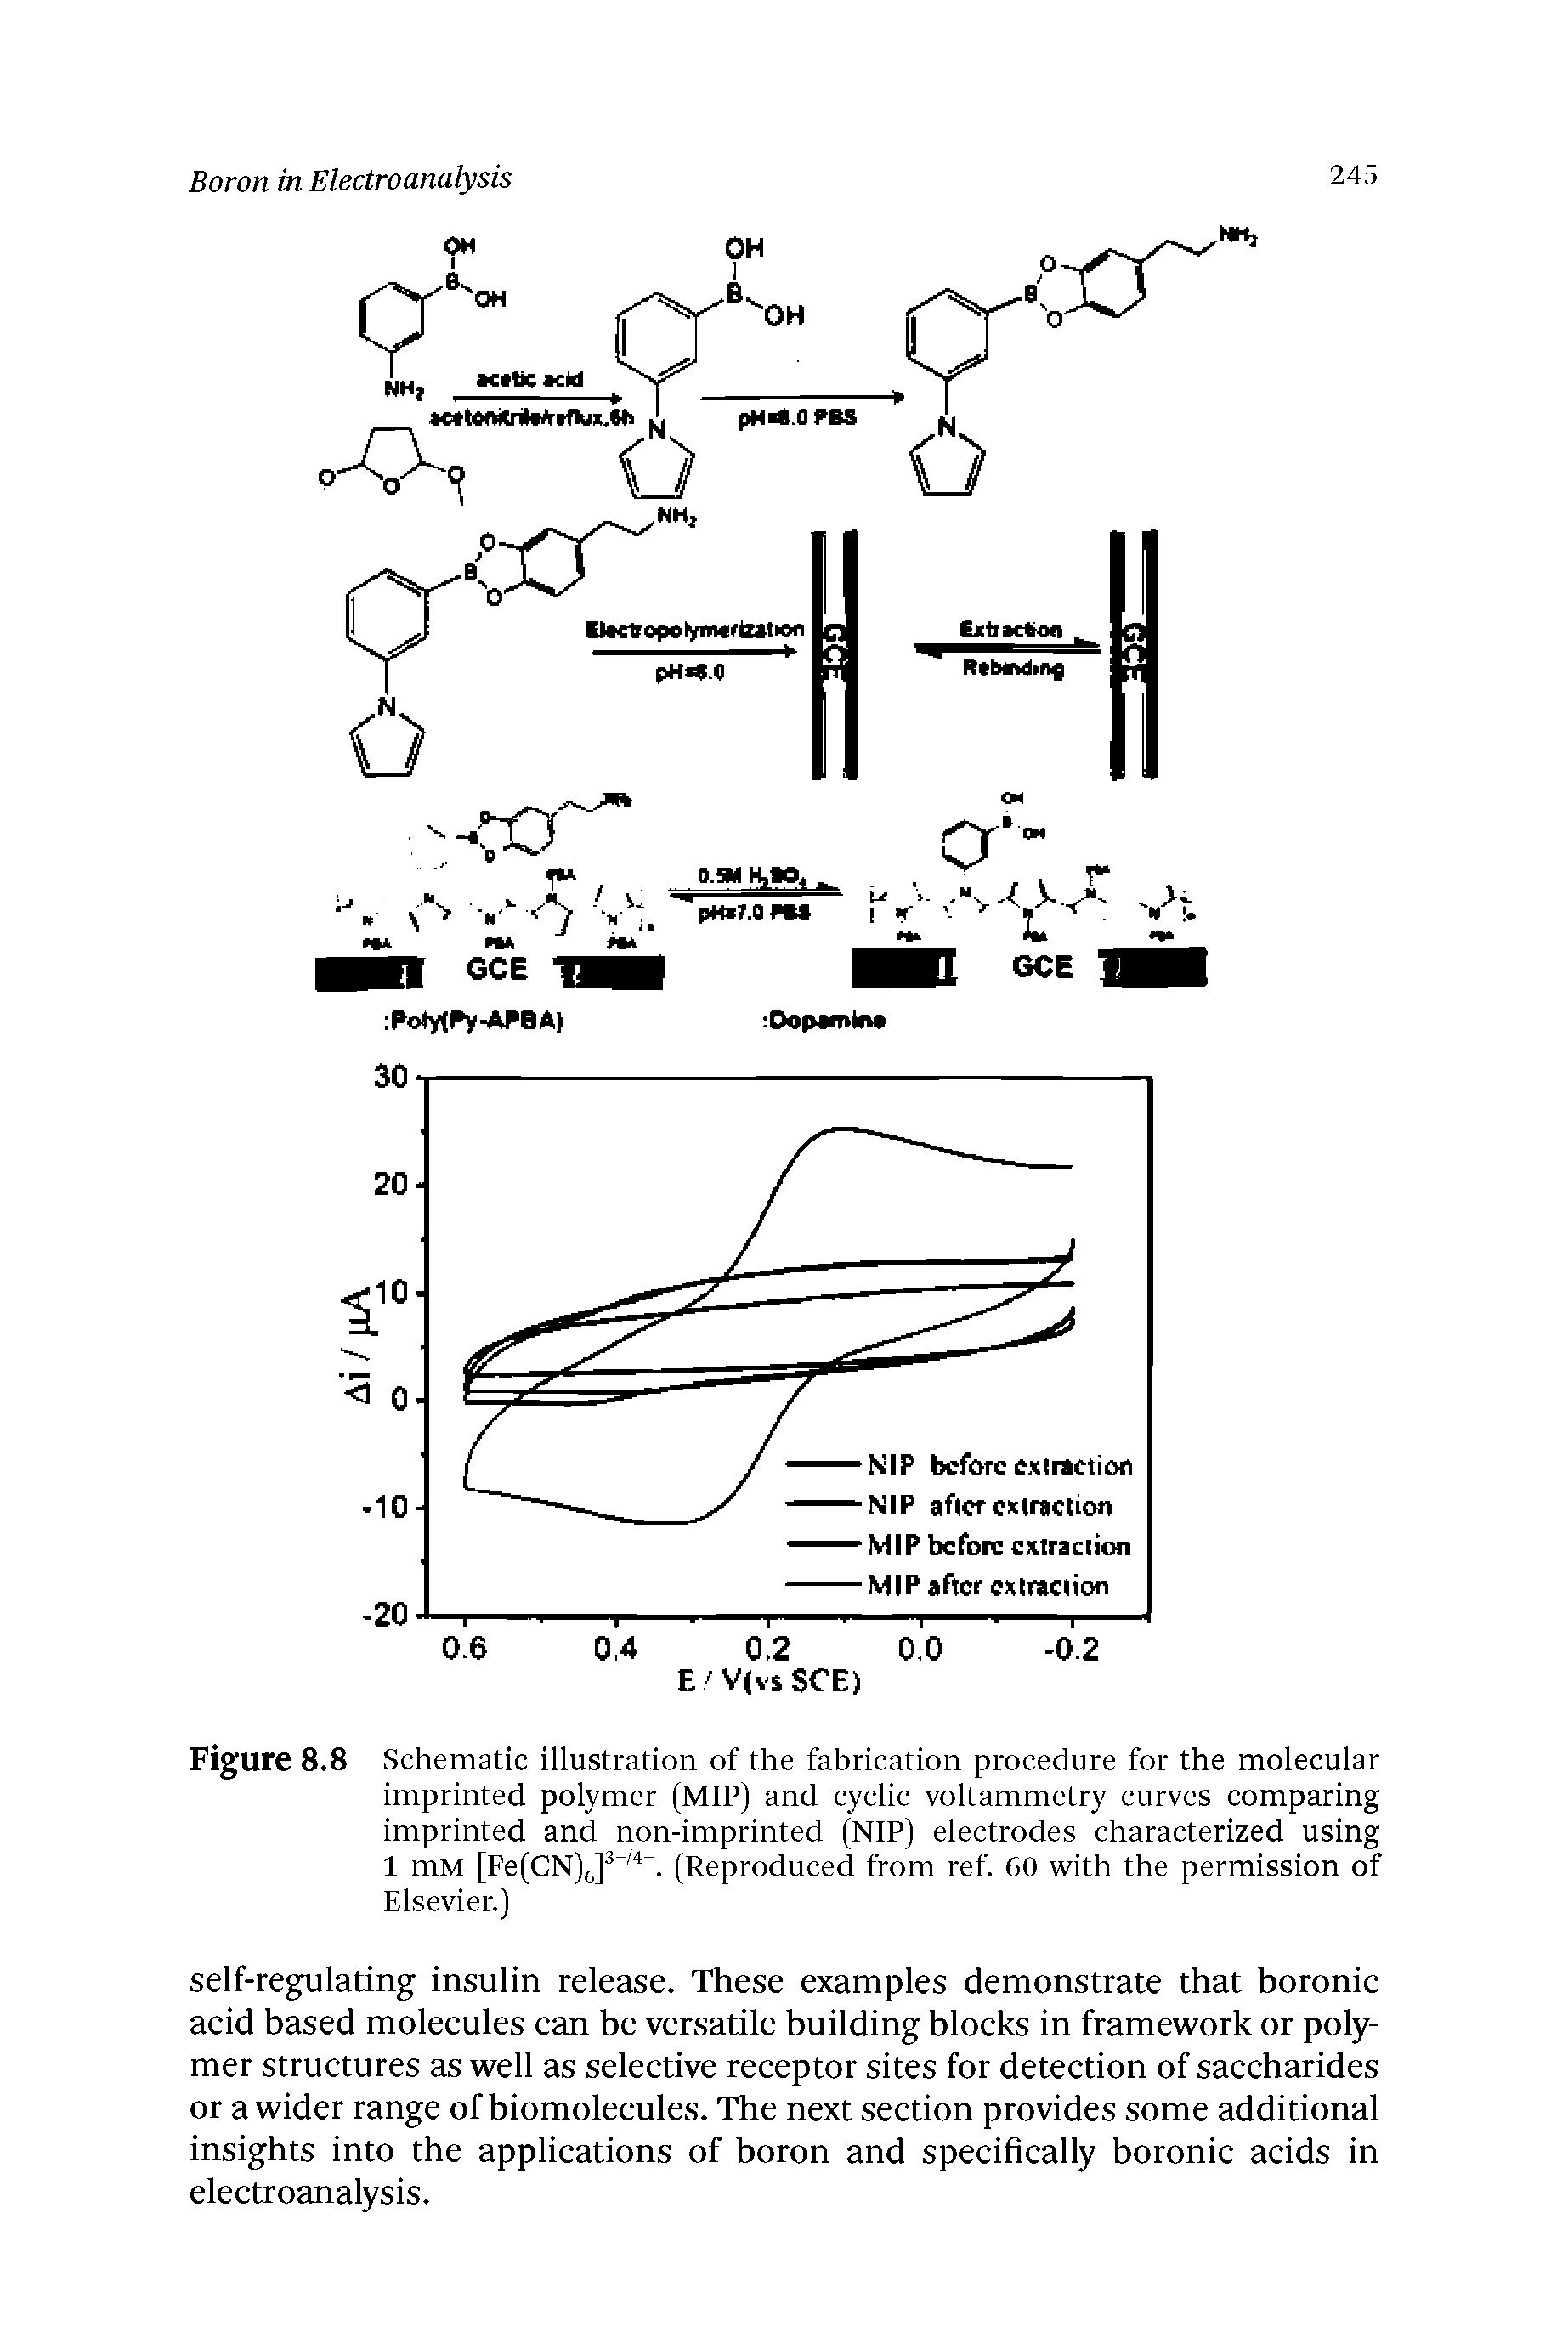 Figure 8.8 Schematic illustration of the fabrication procedure for the molecular imprinted polymer (MIP) and cyclic voltammetry curves comparing imprinted and non-imprinted (NIP) electrodes characterized using 1 mM [Fe(CN)6] . (Reproduced from ref. 60 with the permission of Elsevier.)...